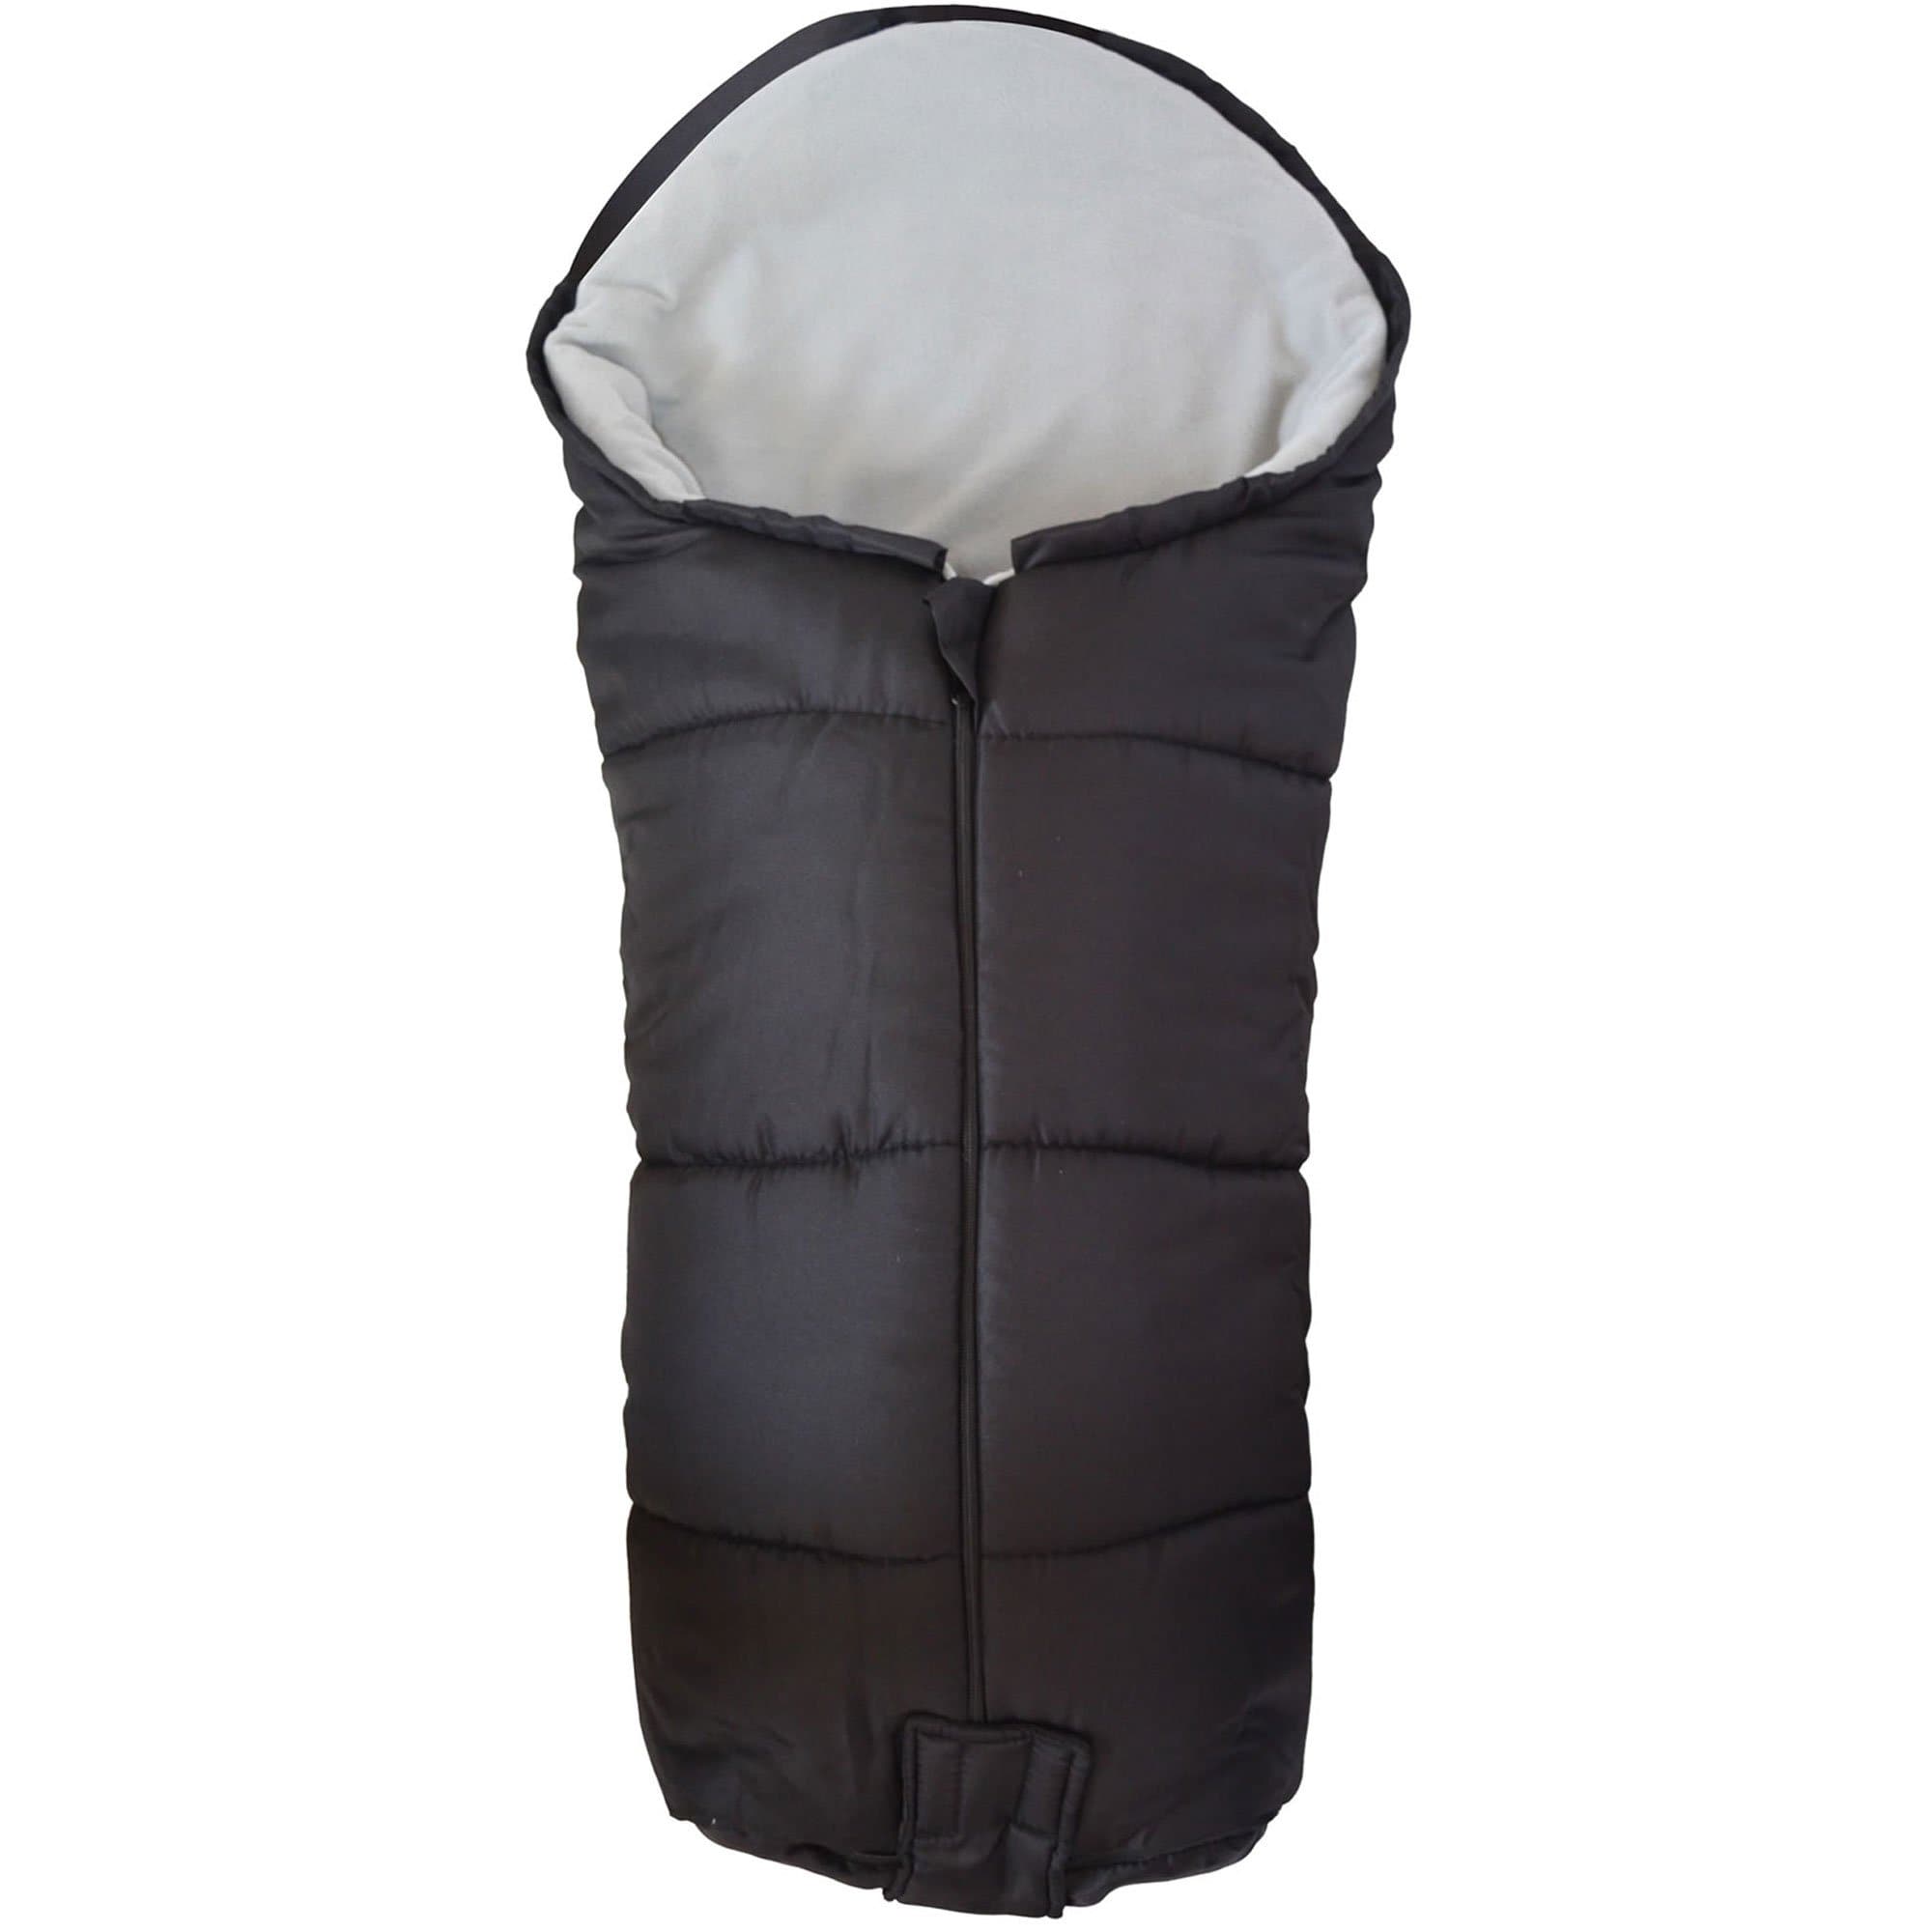 Deluxe Footmuff / Cosy Toes Compatible with Little Shield - For Your Little One